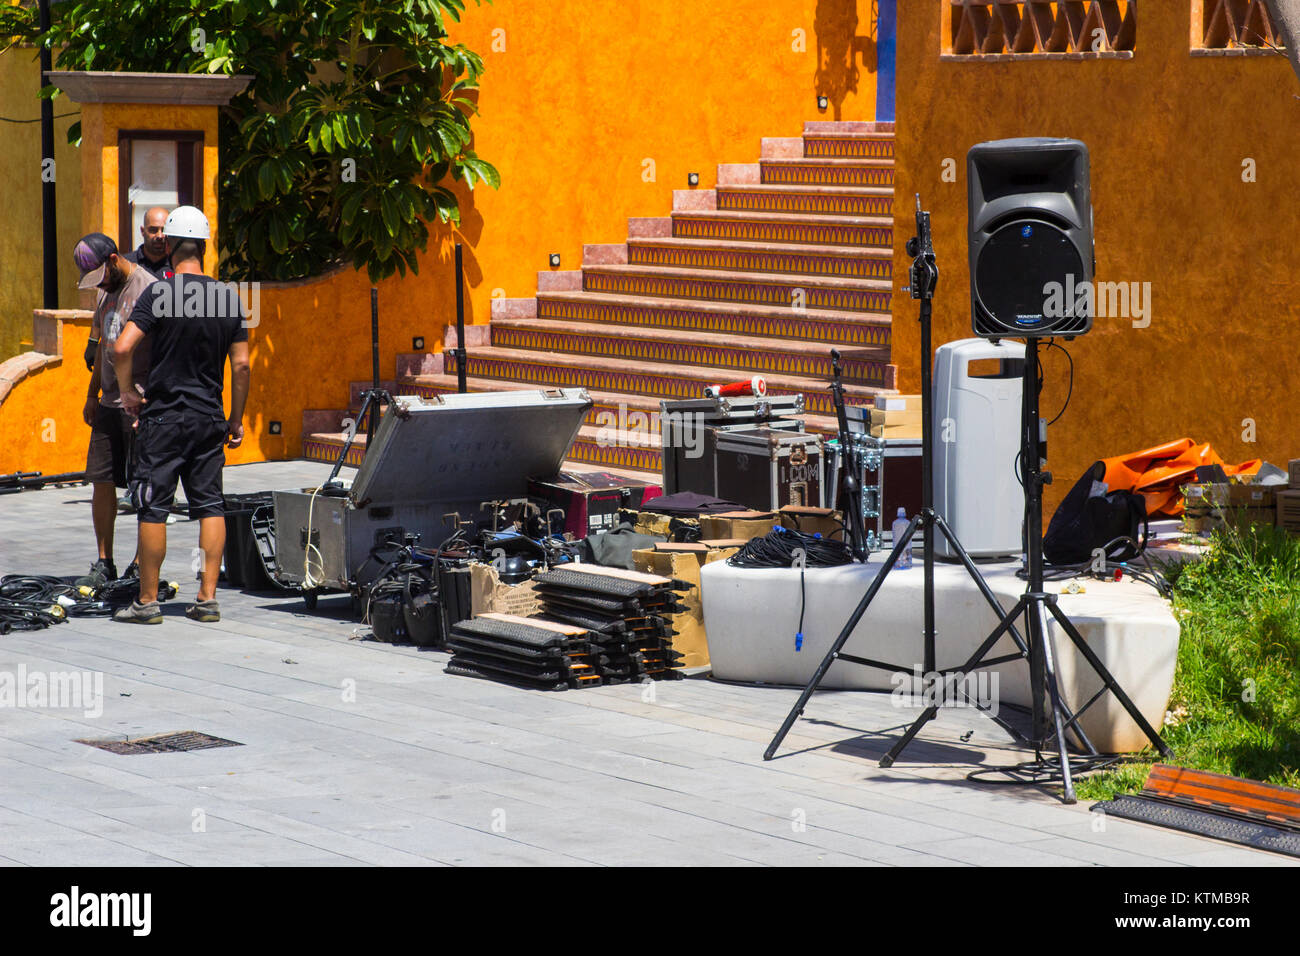 Sound engineers preparing for a street concert and setting up an amplification system in a street in Playa de las Americas Tenerife Stock Photo